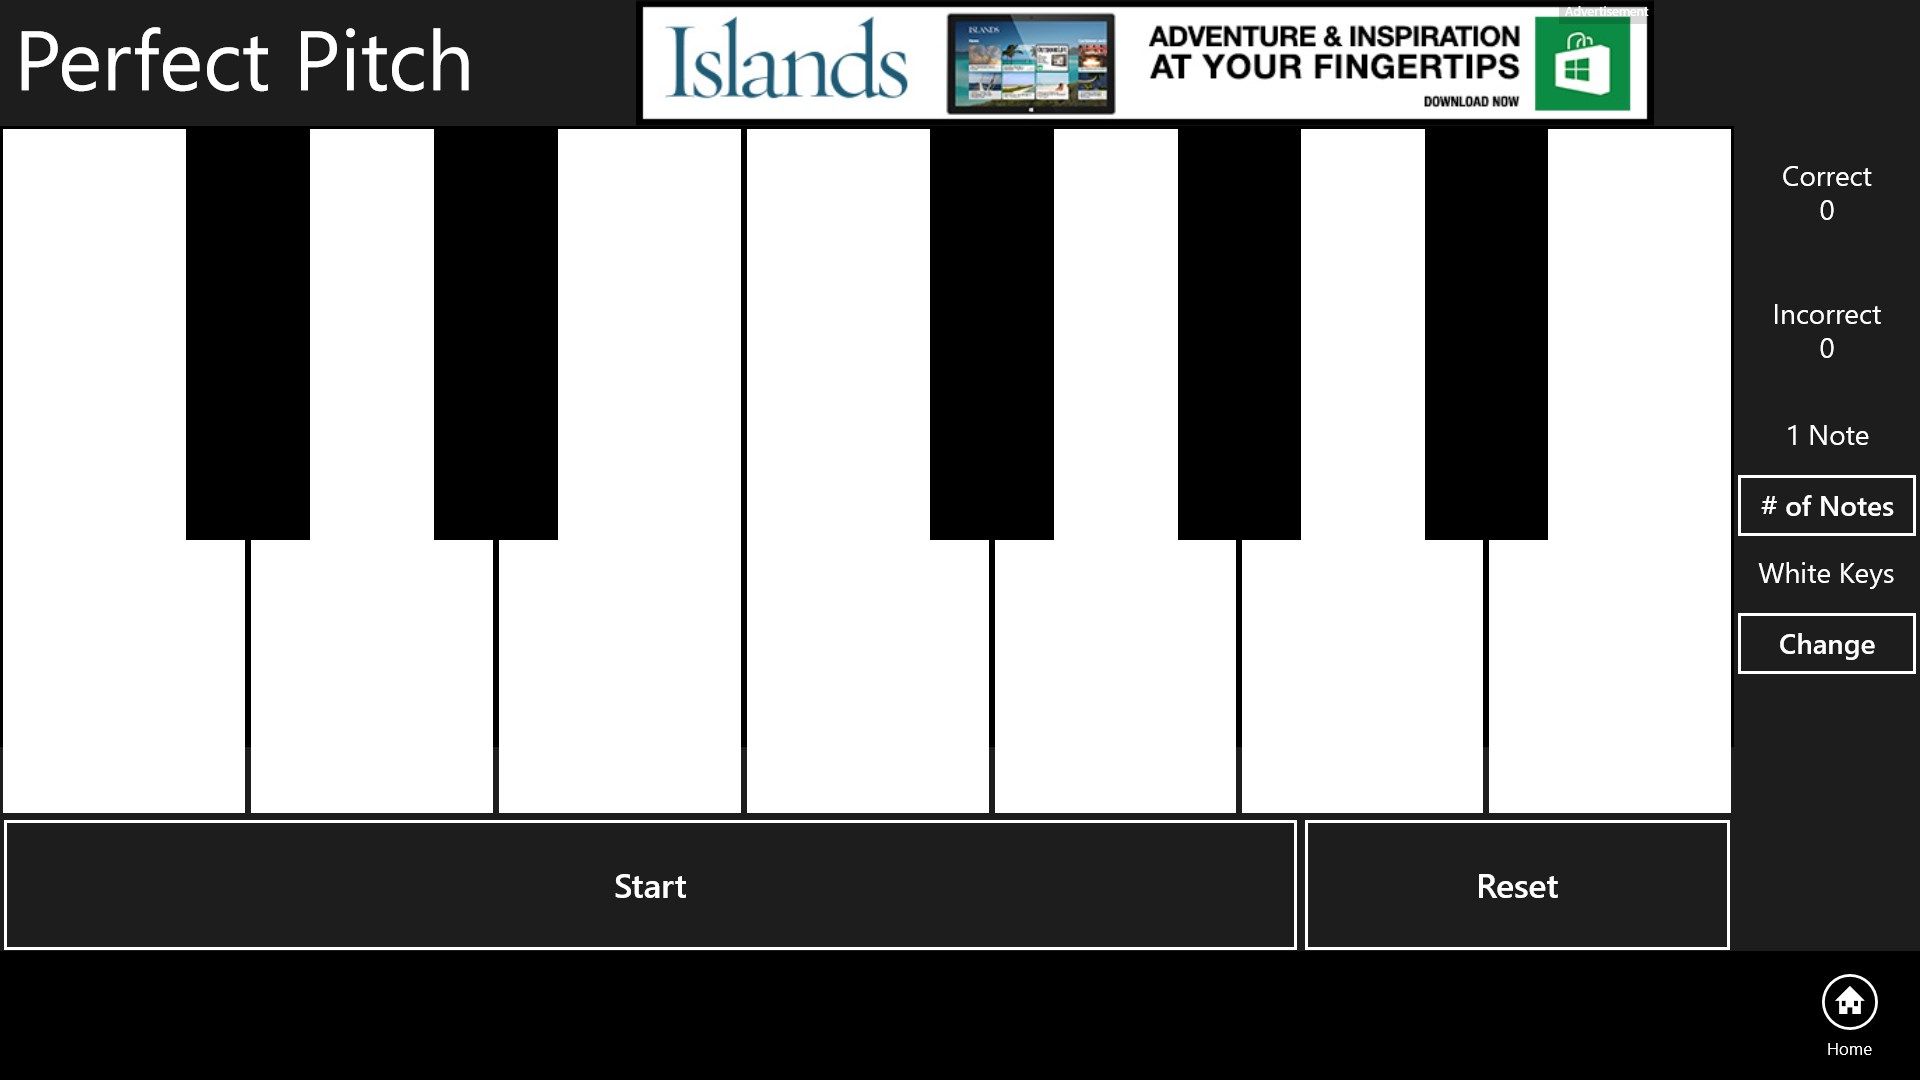 Learn to identify single, two, or three notes played simultaneously.